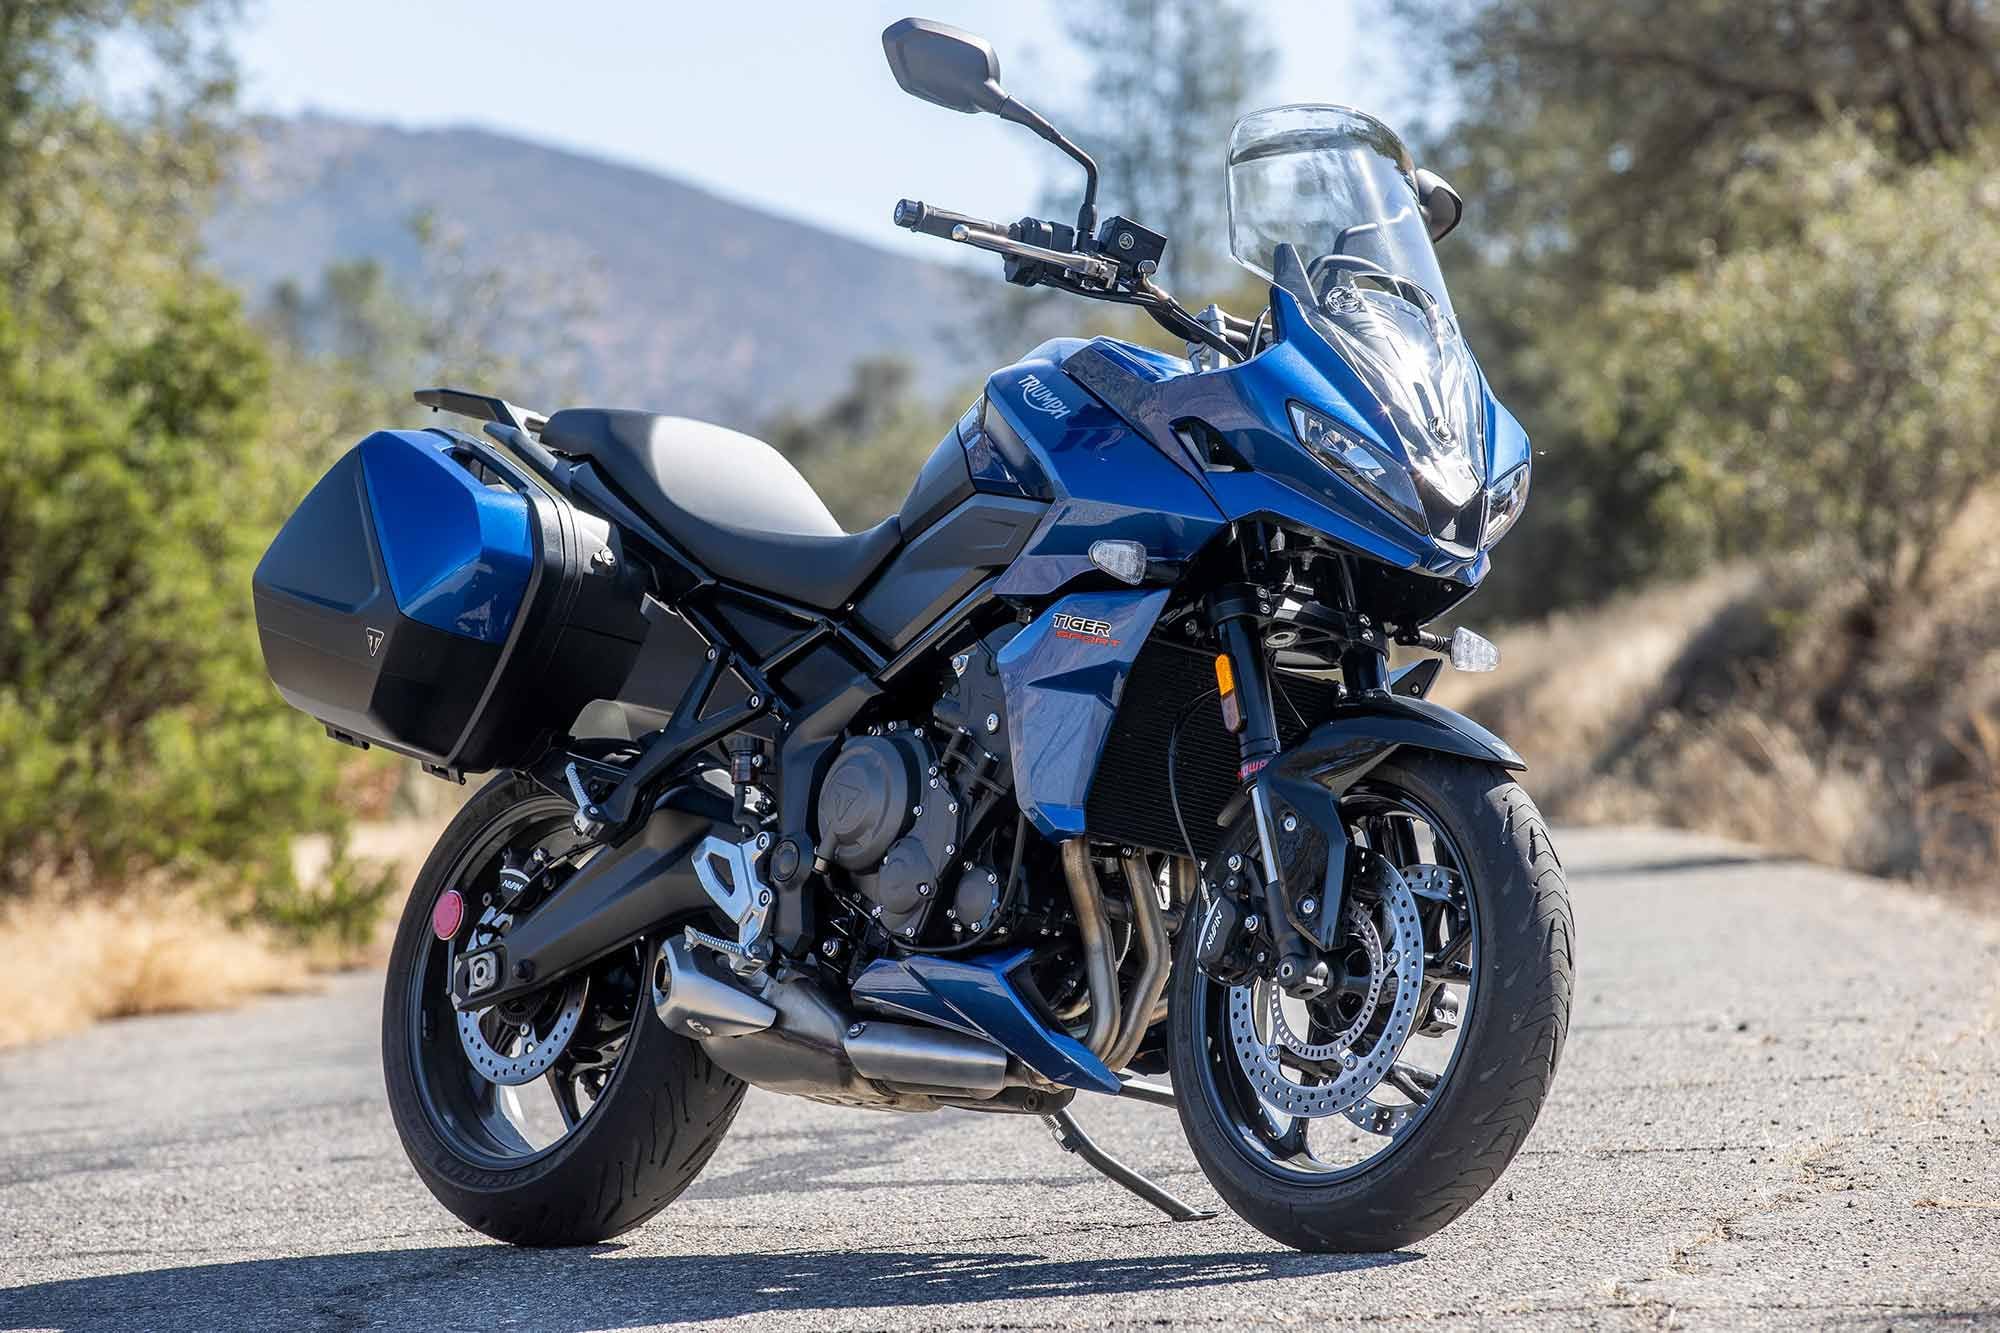 The Triumph Tiger Sport 660 was an all-new model in 2022. Consider it an upright urban sportbike packaged as an asphalt-adventure machine.